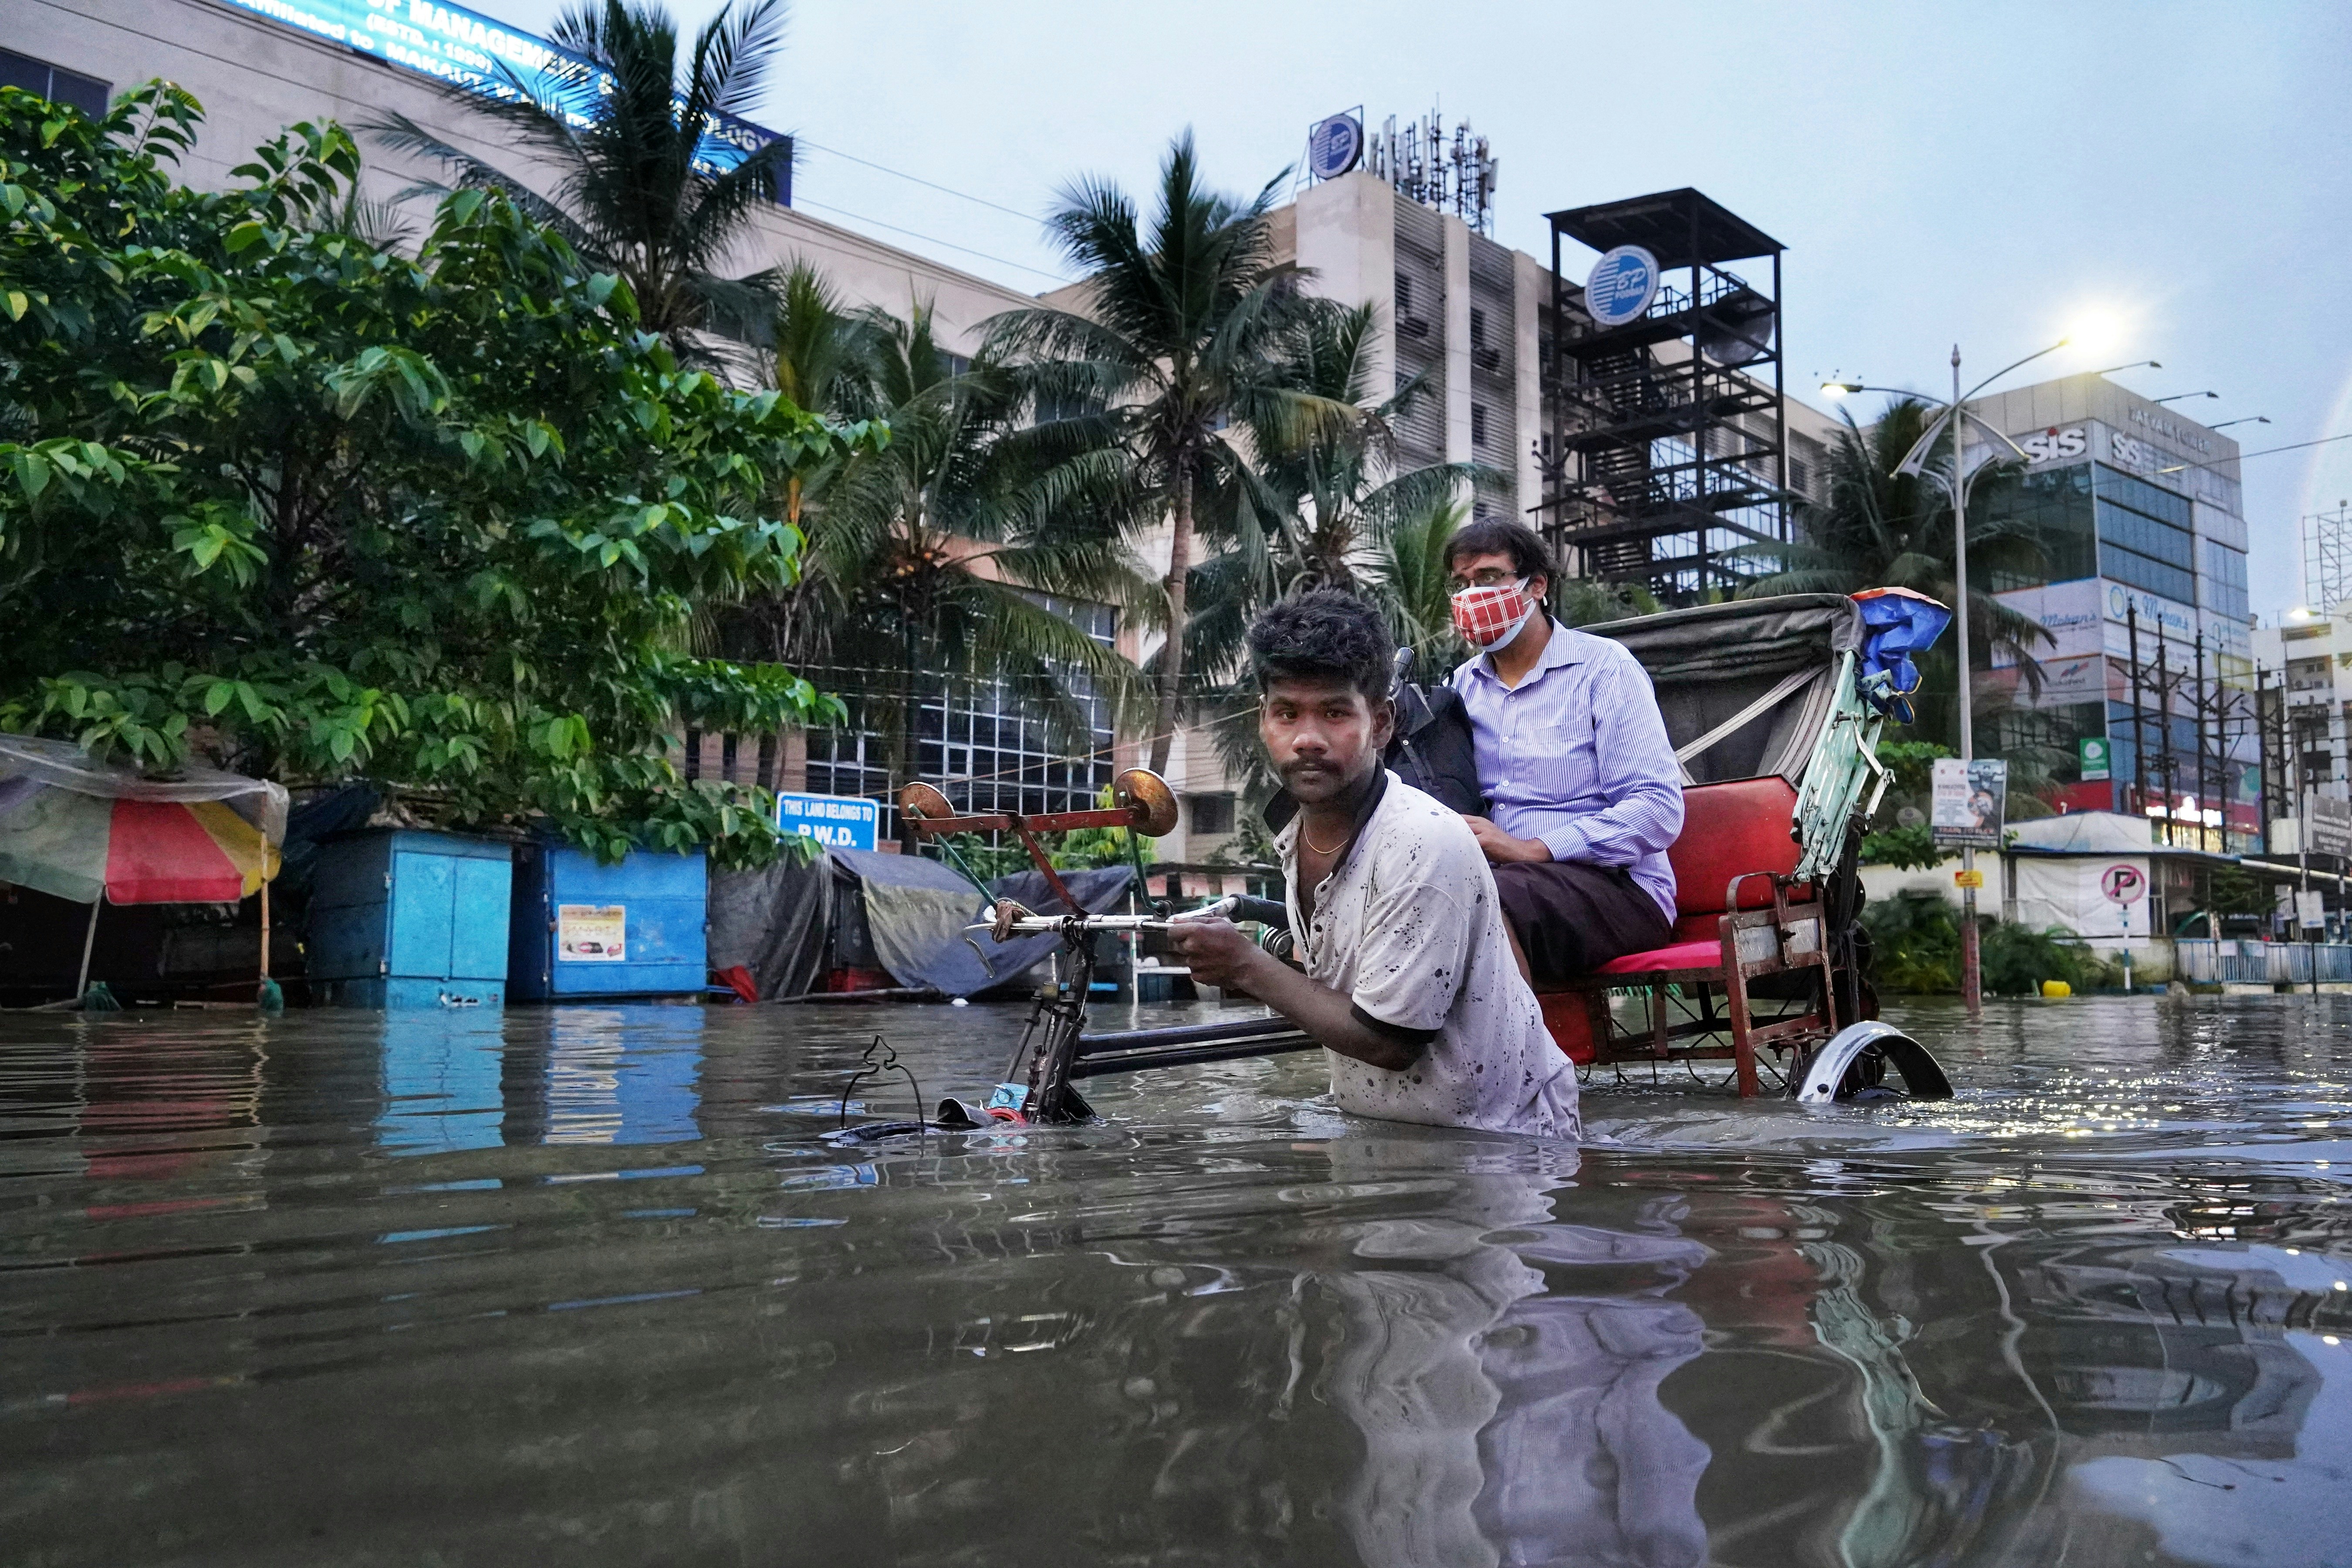 Mumbai’s floods are becoming more frequent and result in large-scale disruption. : Dibakar Roy via Unsplash – https://tinyurl.com/bpa74z82 Unsplash Licence